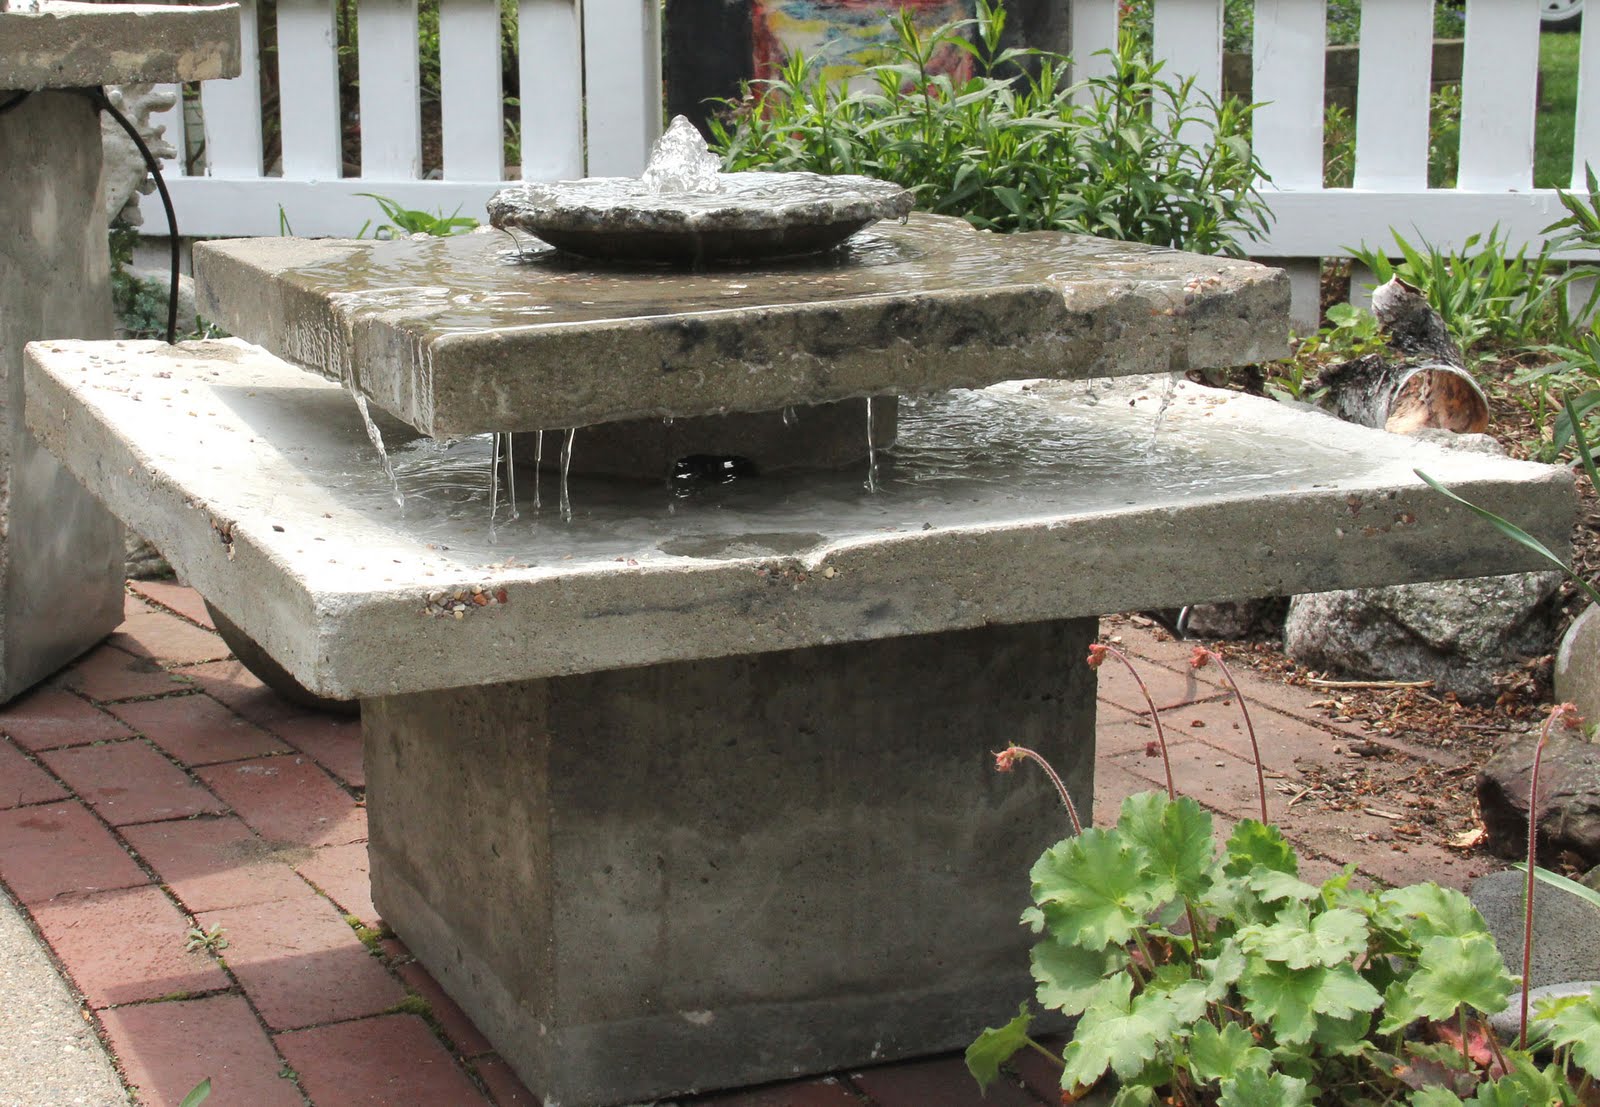 art studio: Two new concrete fountains on the move today!!!